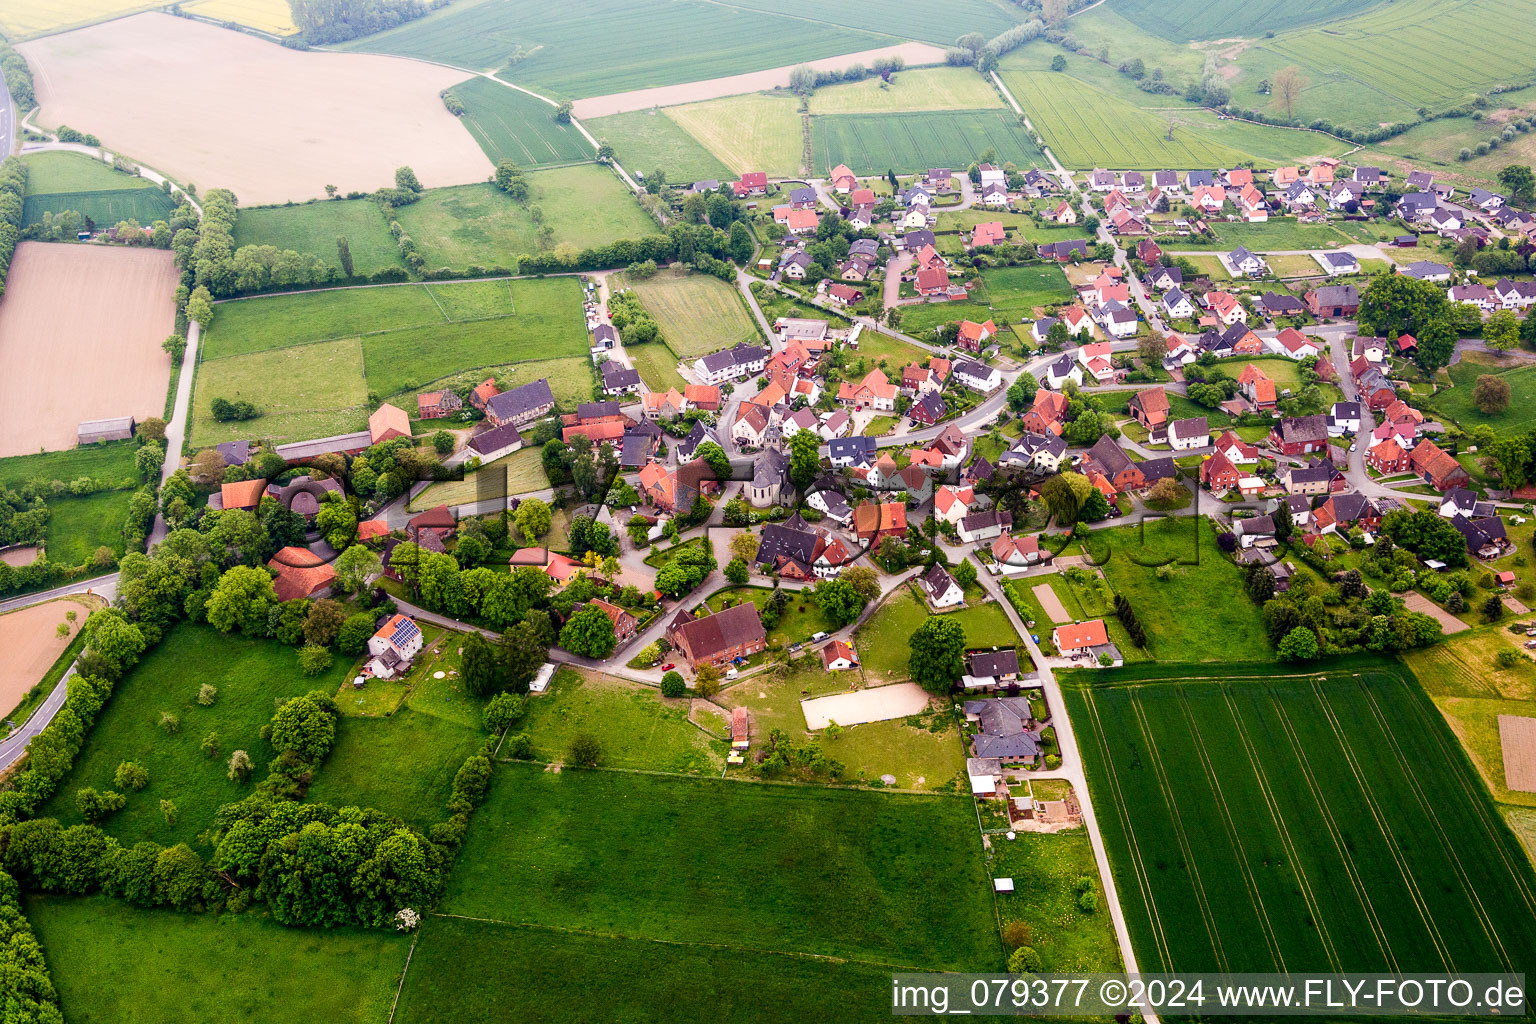 Aerial view of Village - view on the edge of agricultural fields and farmland in the district Rolfzen in Steinheim in the state North Rhine-Westphalia, Germany